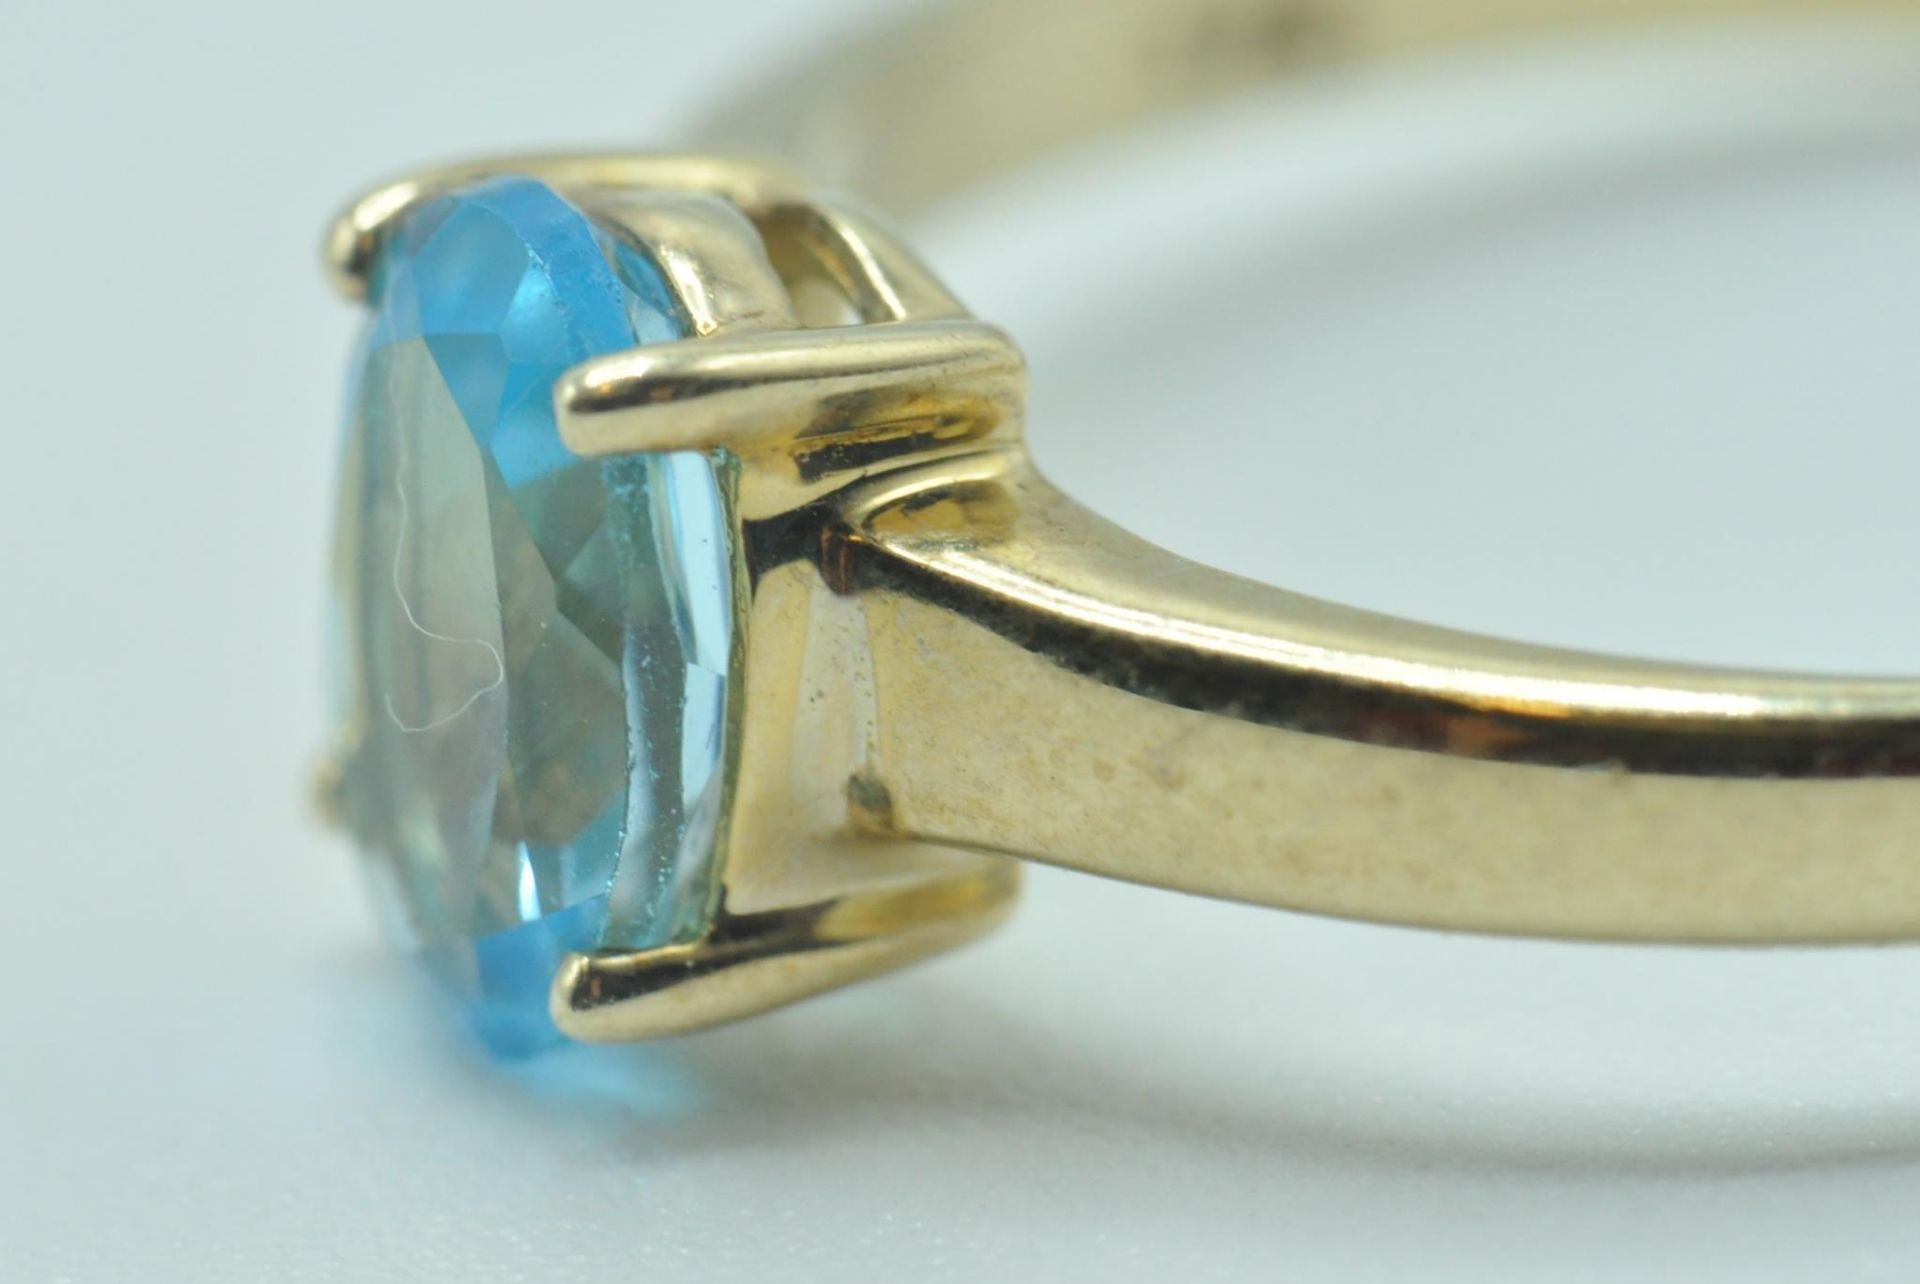 9CT GOLD AND BLUE STONE SOLITAIRE RING - Image 3 of 6